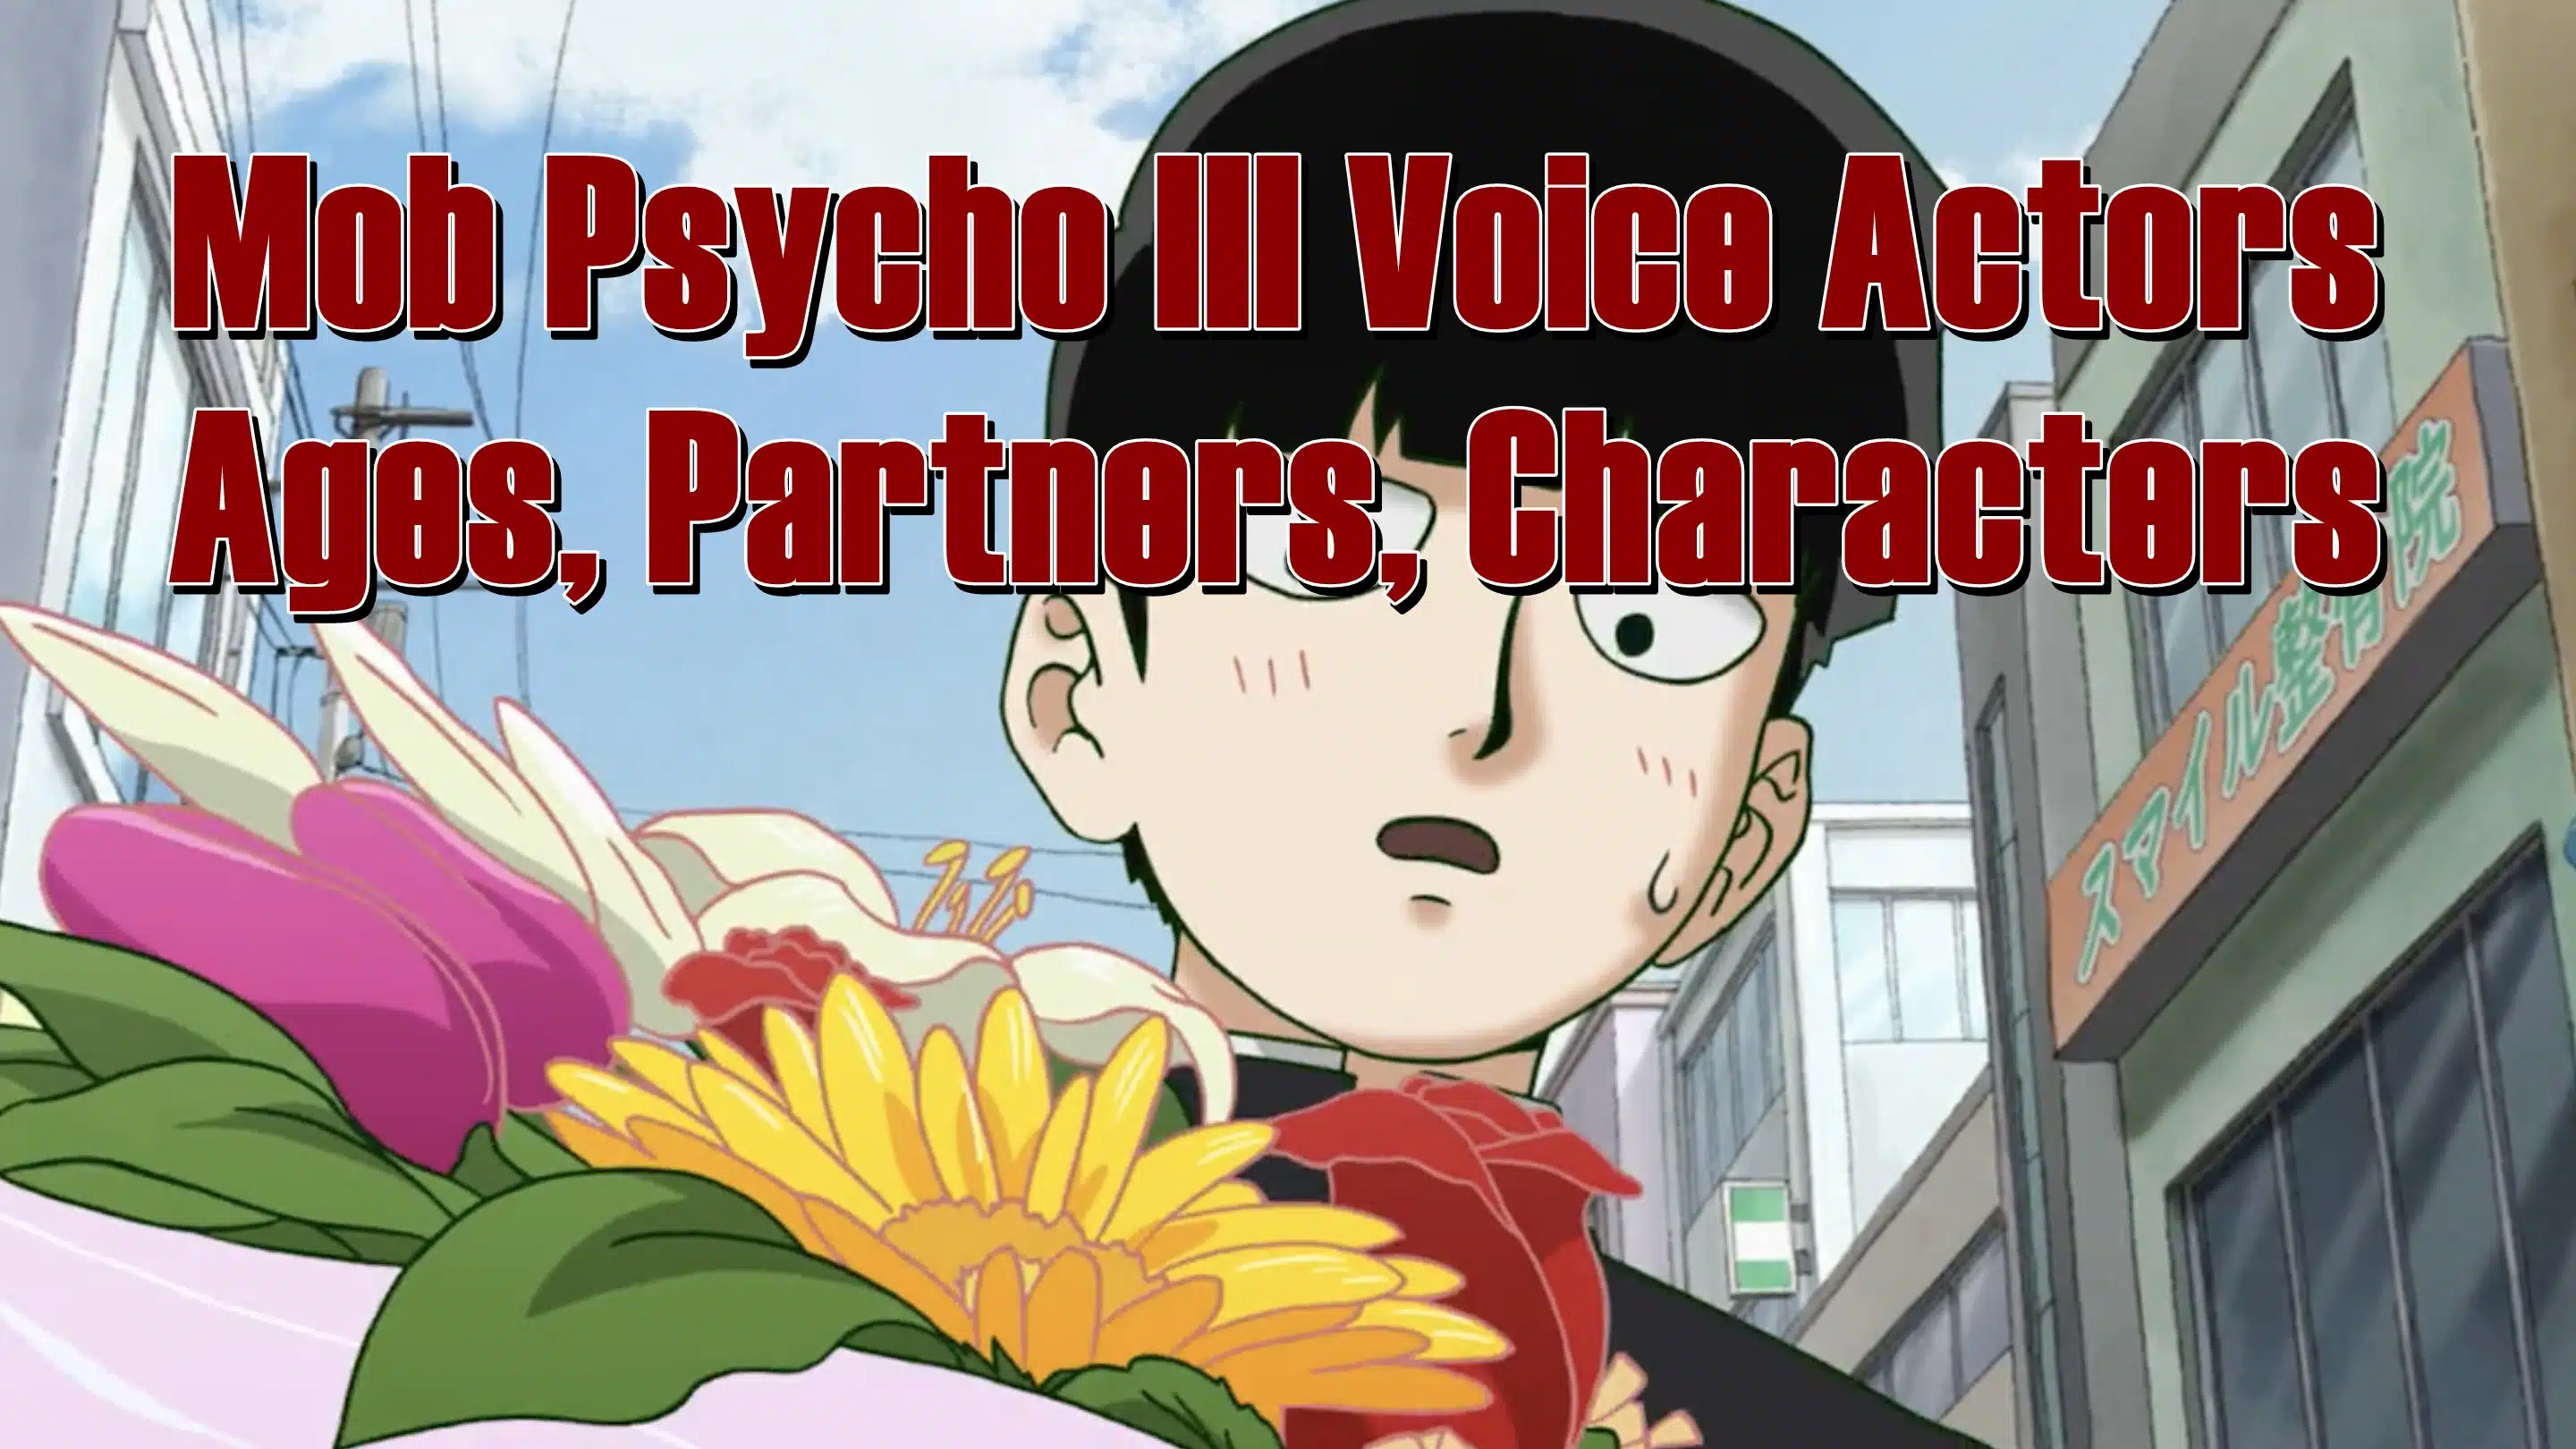 Mob Psycho III Voice Actors - Ages, Partners, Characters